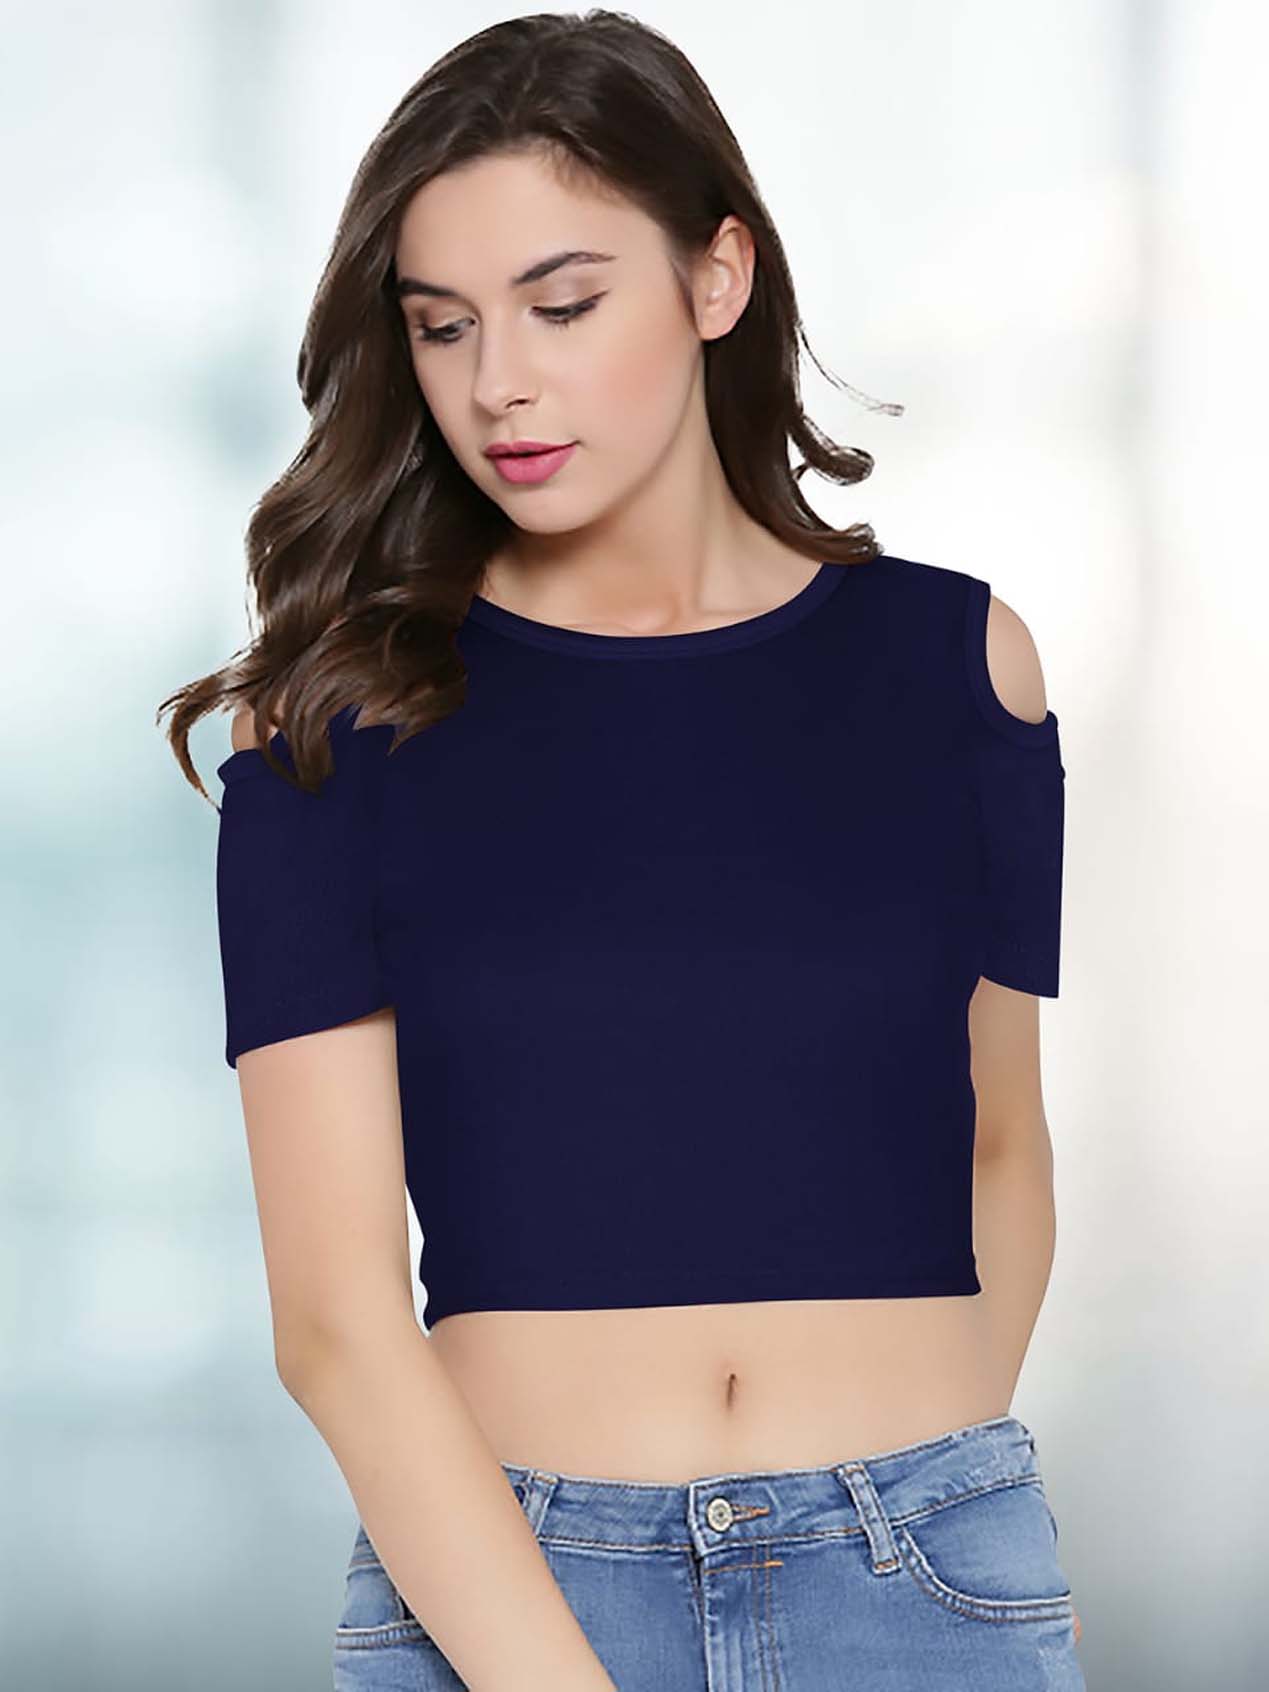 skinny type of material in this crop top and new latest design